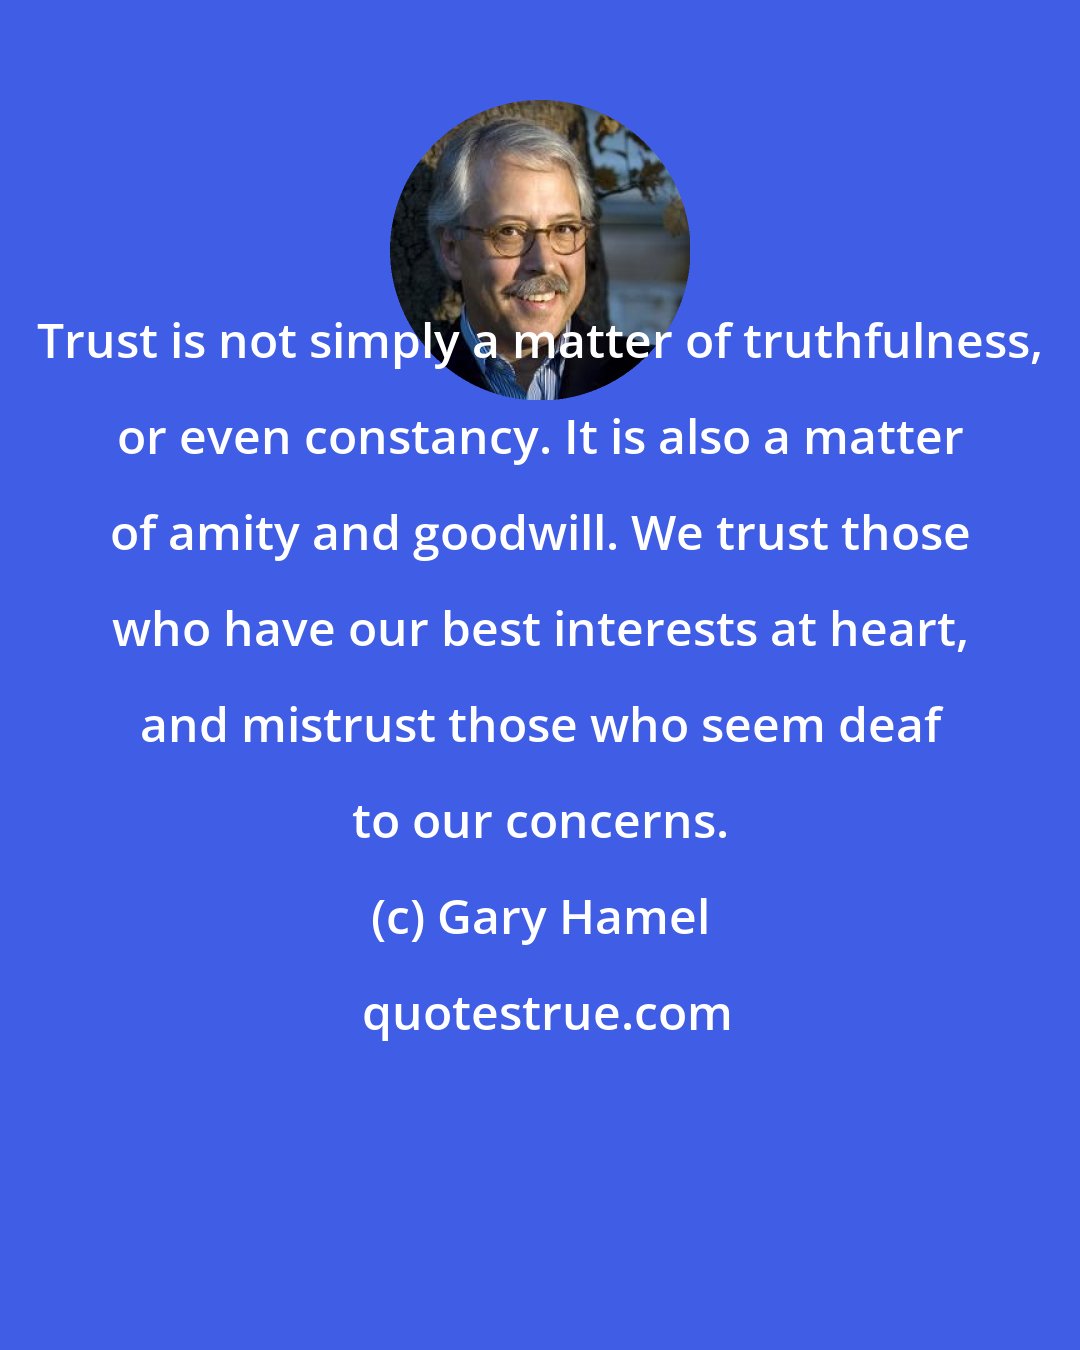 Gary Hamel: Trust is not simply a matter of truthfulness, or even constancy. It is also a matter of amity and goodwill. We trust those who have our best interests at heart, and mistrust those who seem deaf to our concerns.